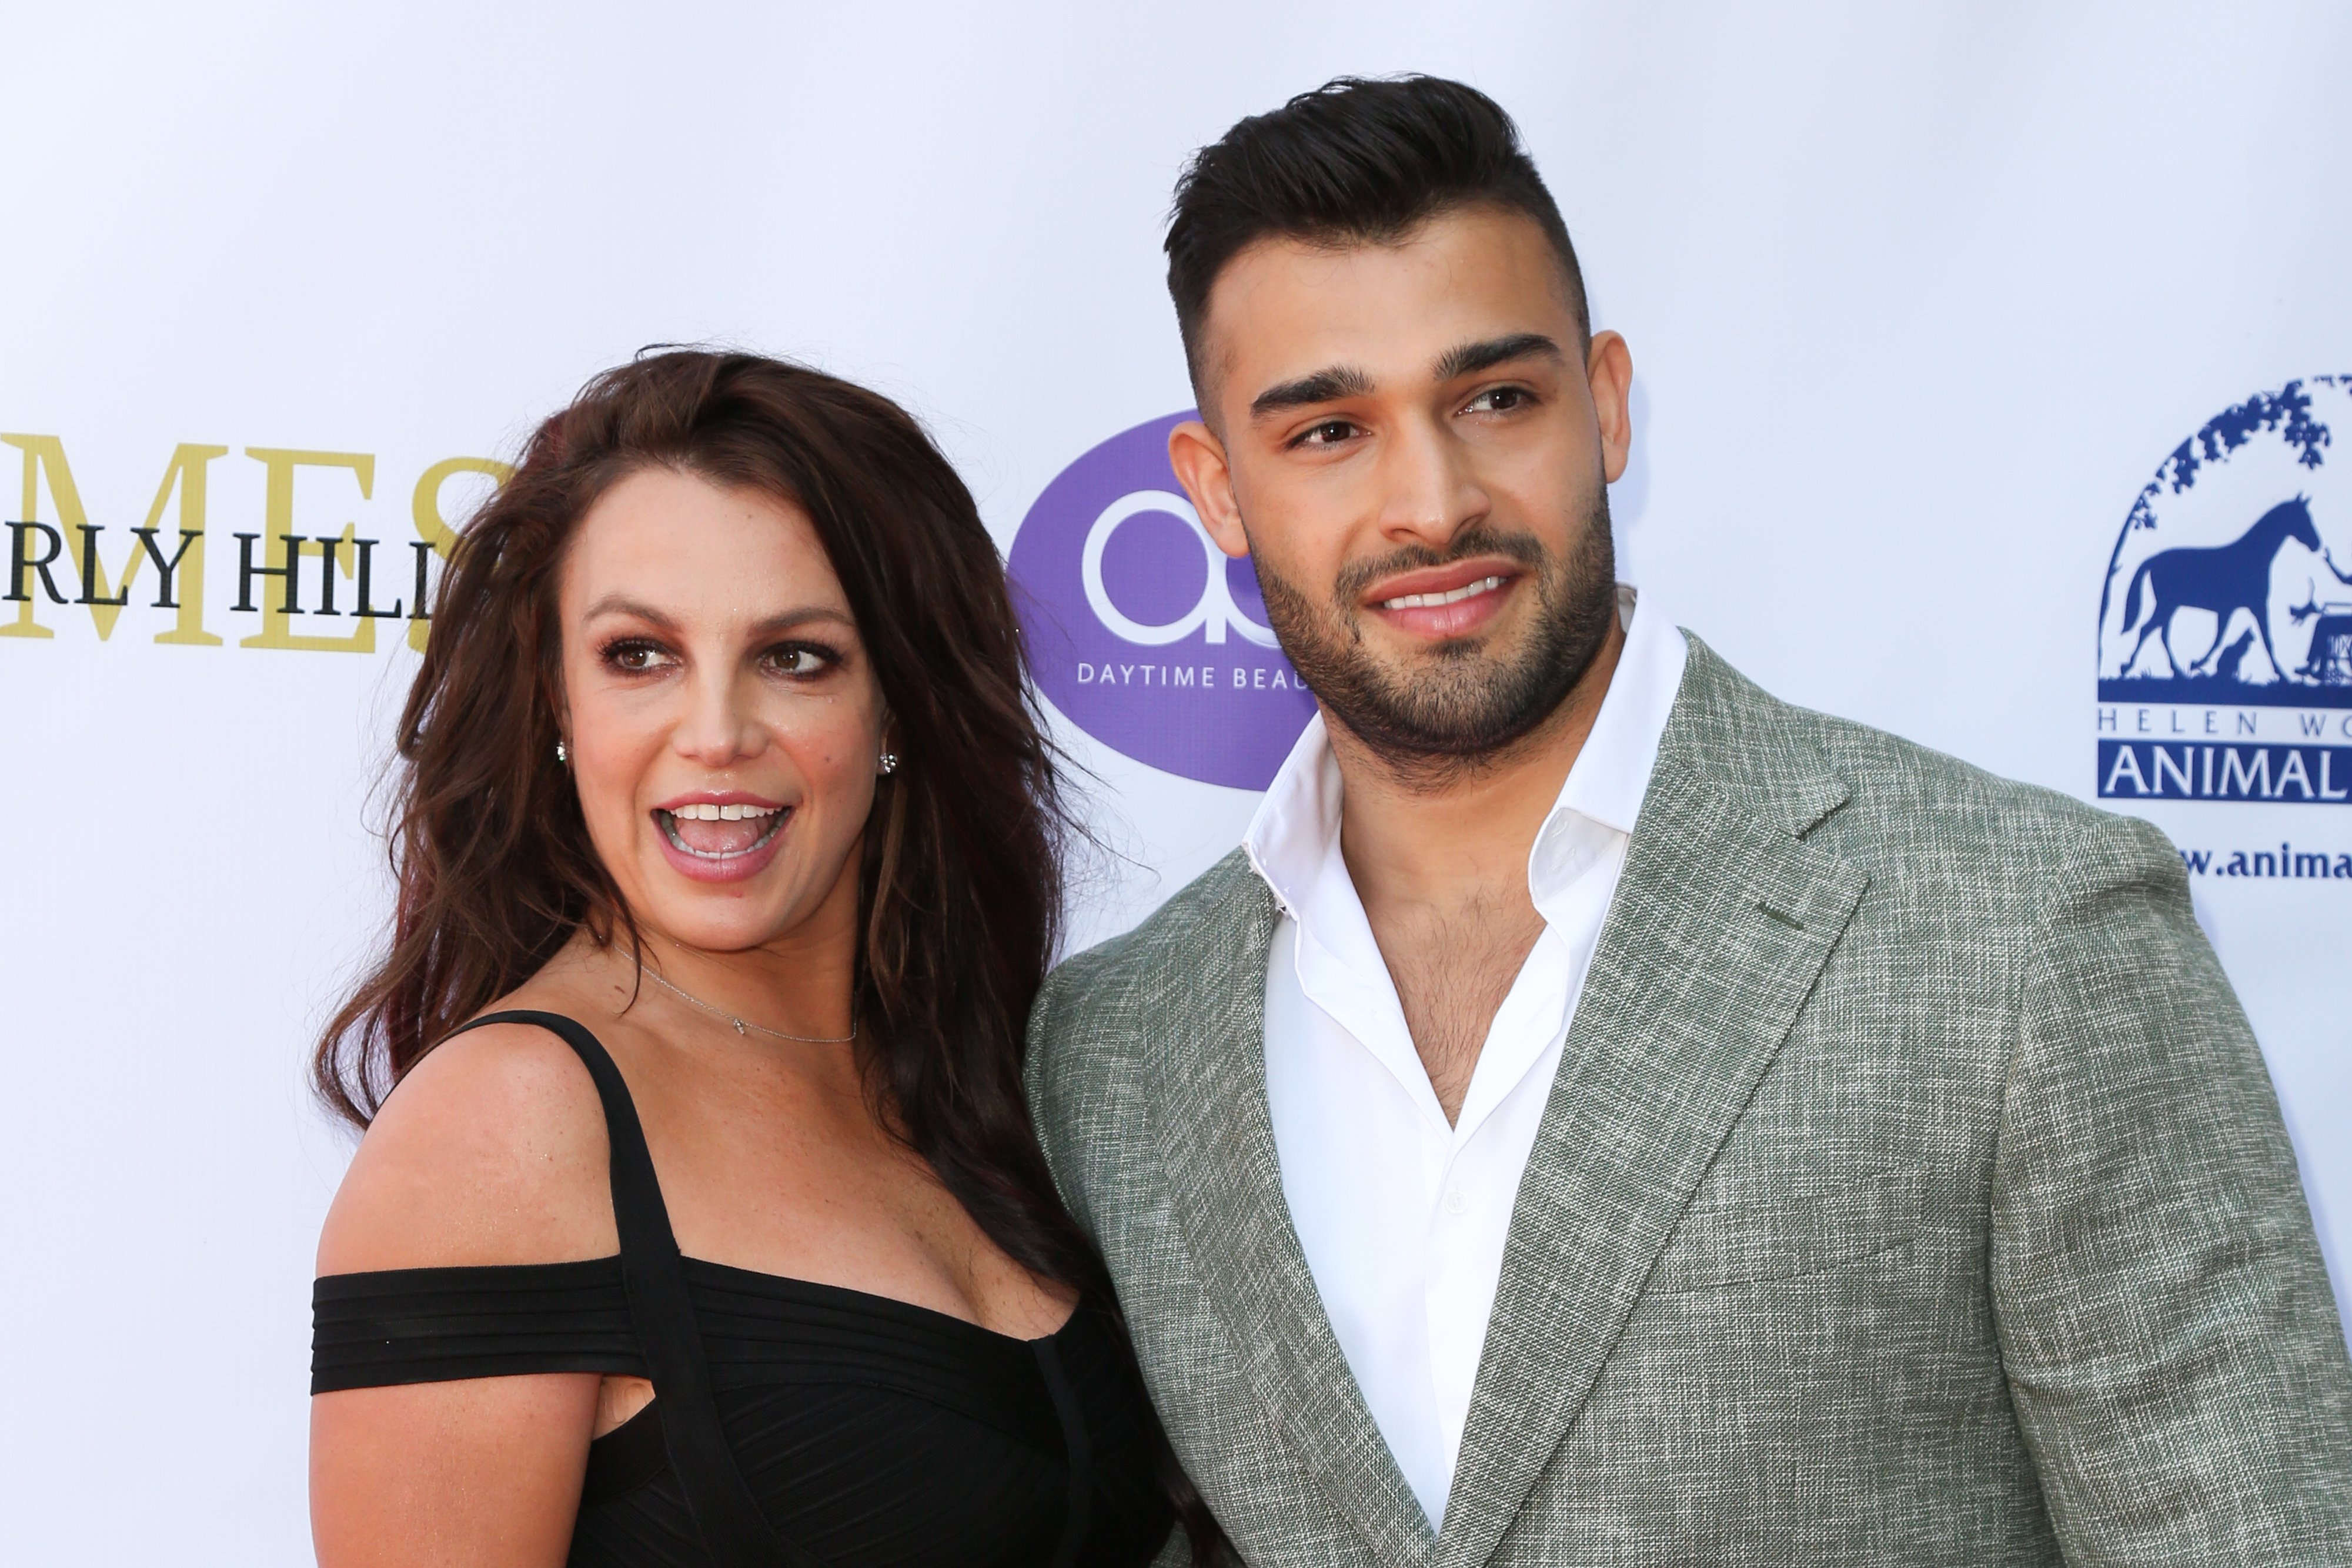 Britney Spears and Sam Ashgari at the 'Daytime Beauty Awards' in L.A., September, 2019. | Photo: Getty Images.